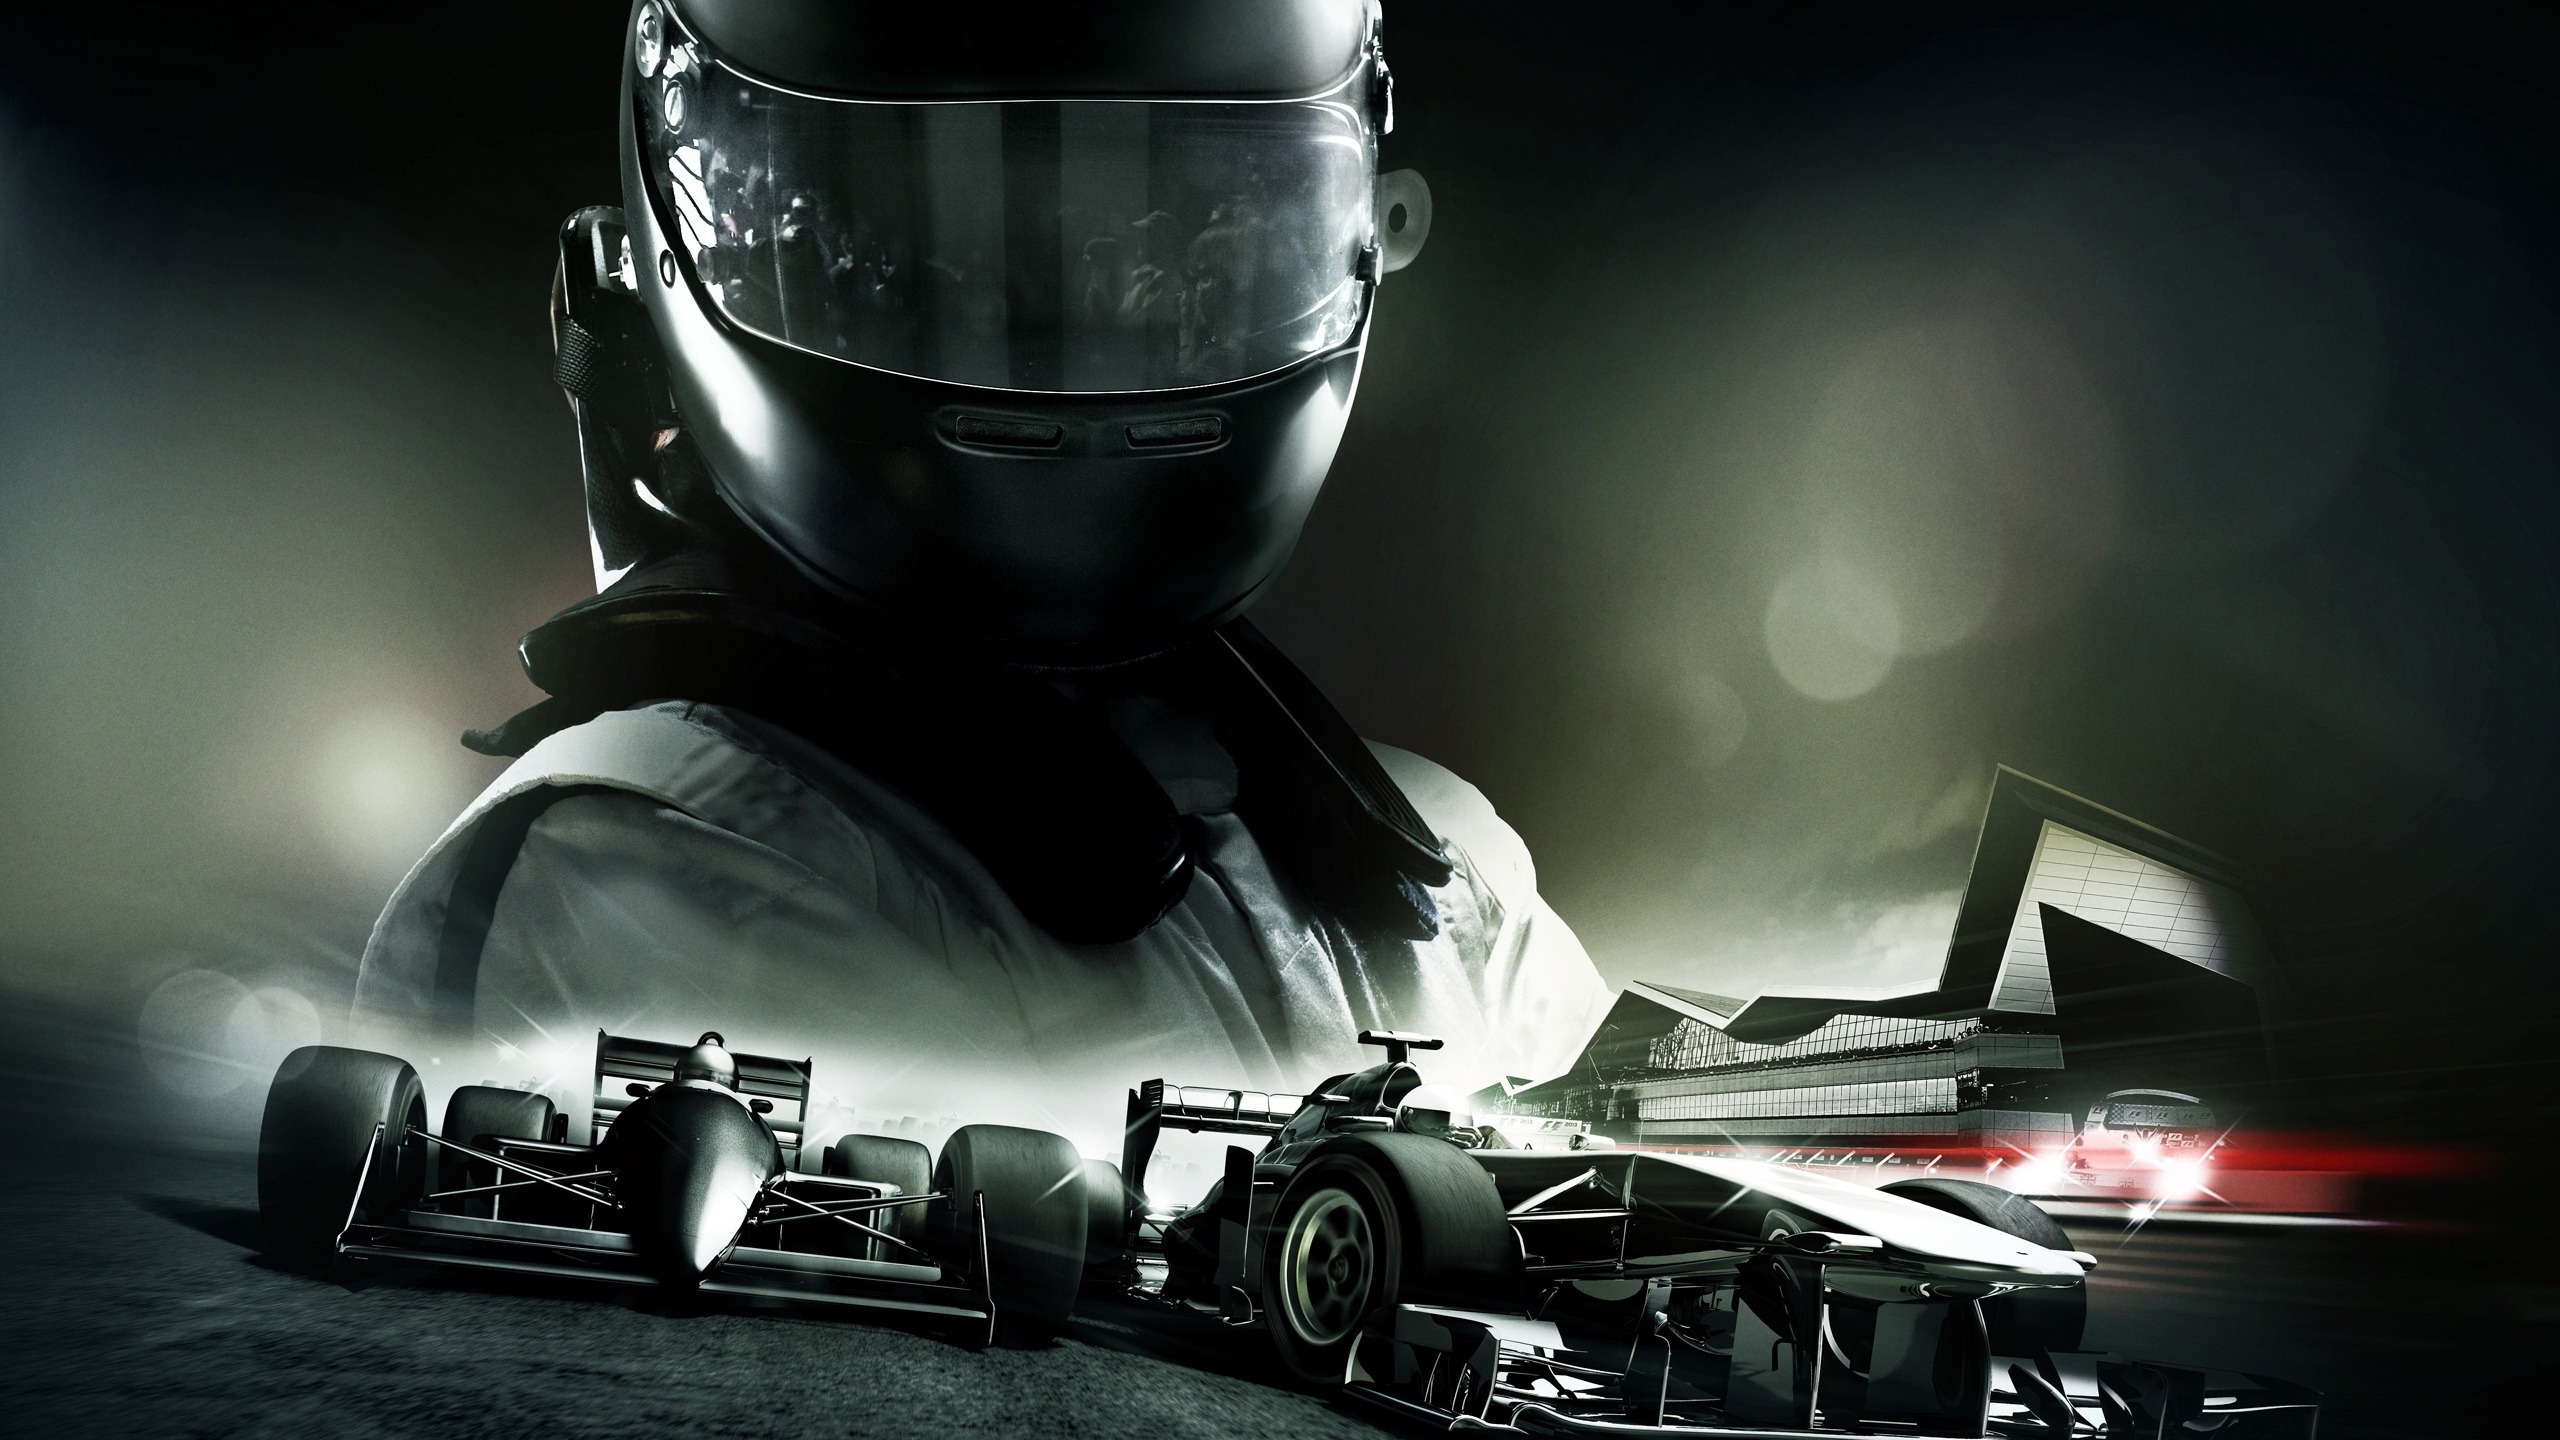 F1 2013 Game for 2560x1440 HDTV resolution